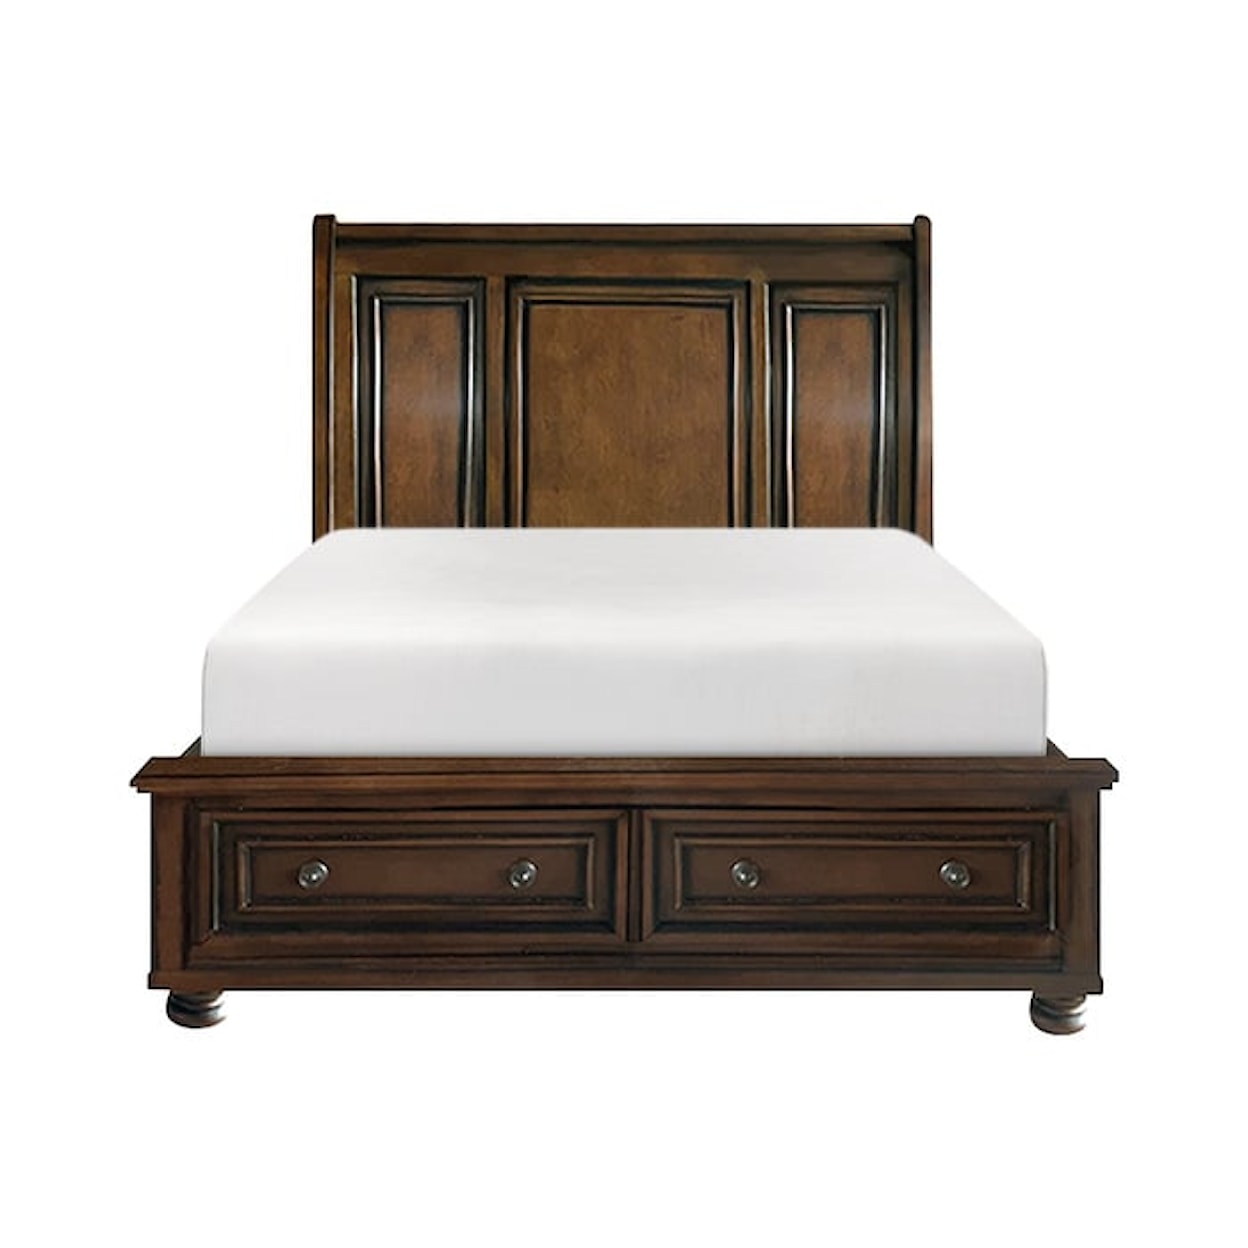 Homelegance Cumberland King Sleigh  Bed with FB Storage